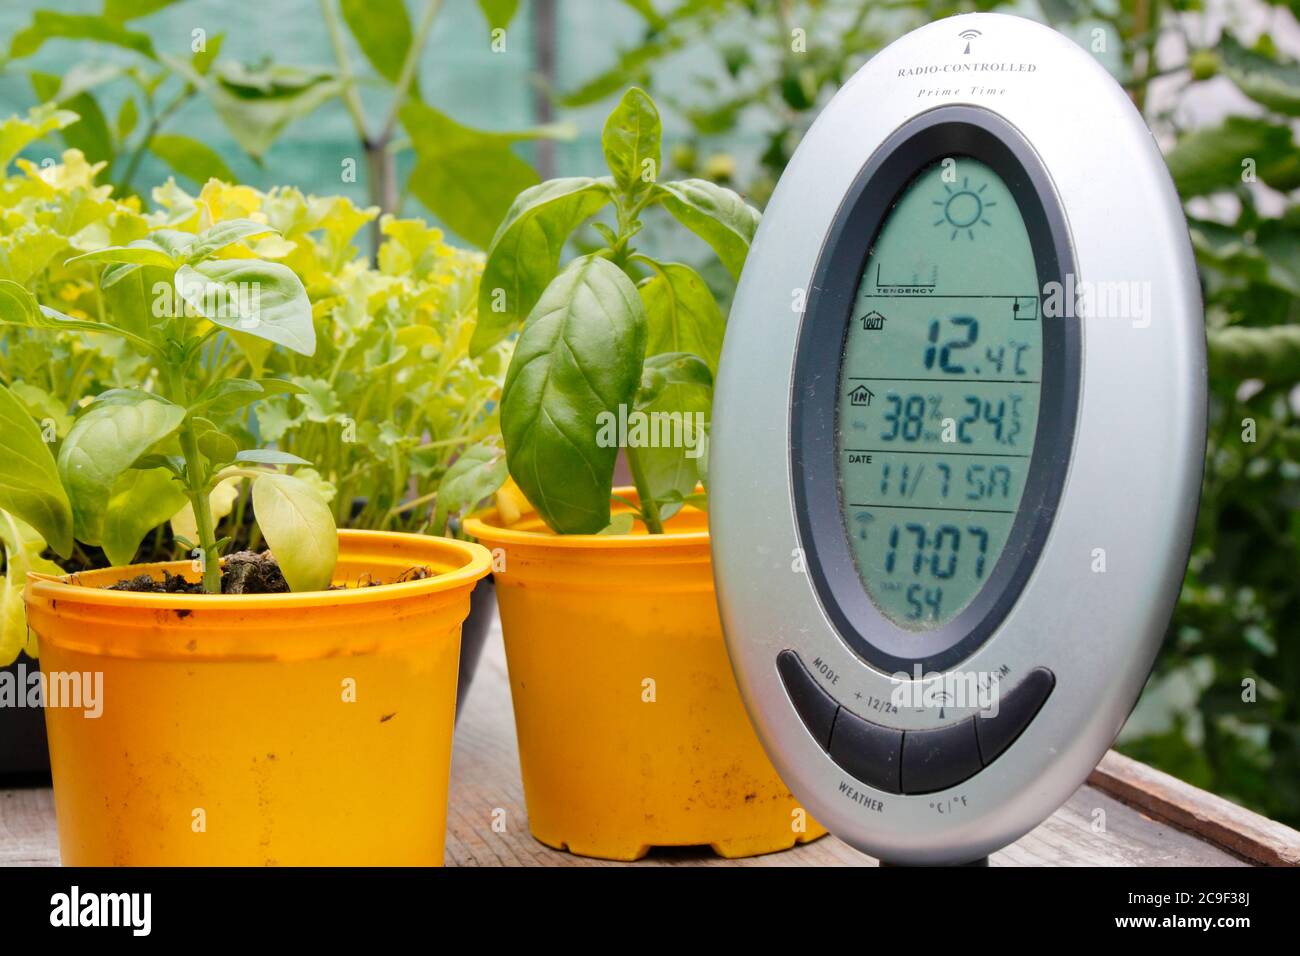 https://c8.alamy.com/comp/2C9F38J/monitoring-the-temperature-and-humidity-in-a-domestic-greenhouse-uk-2C9F38J.jpg